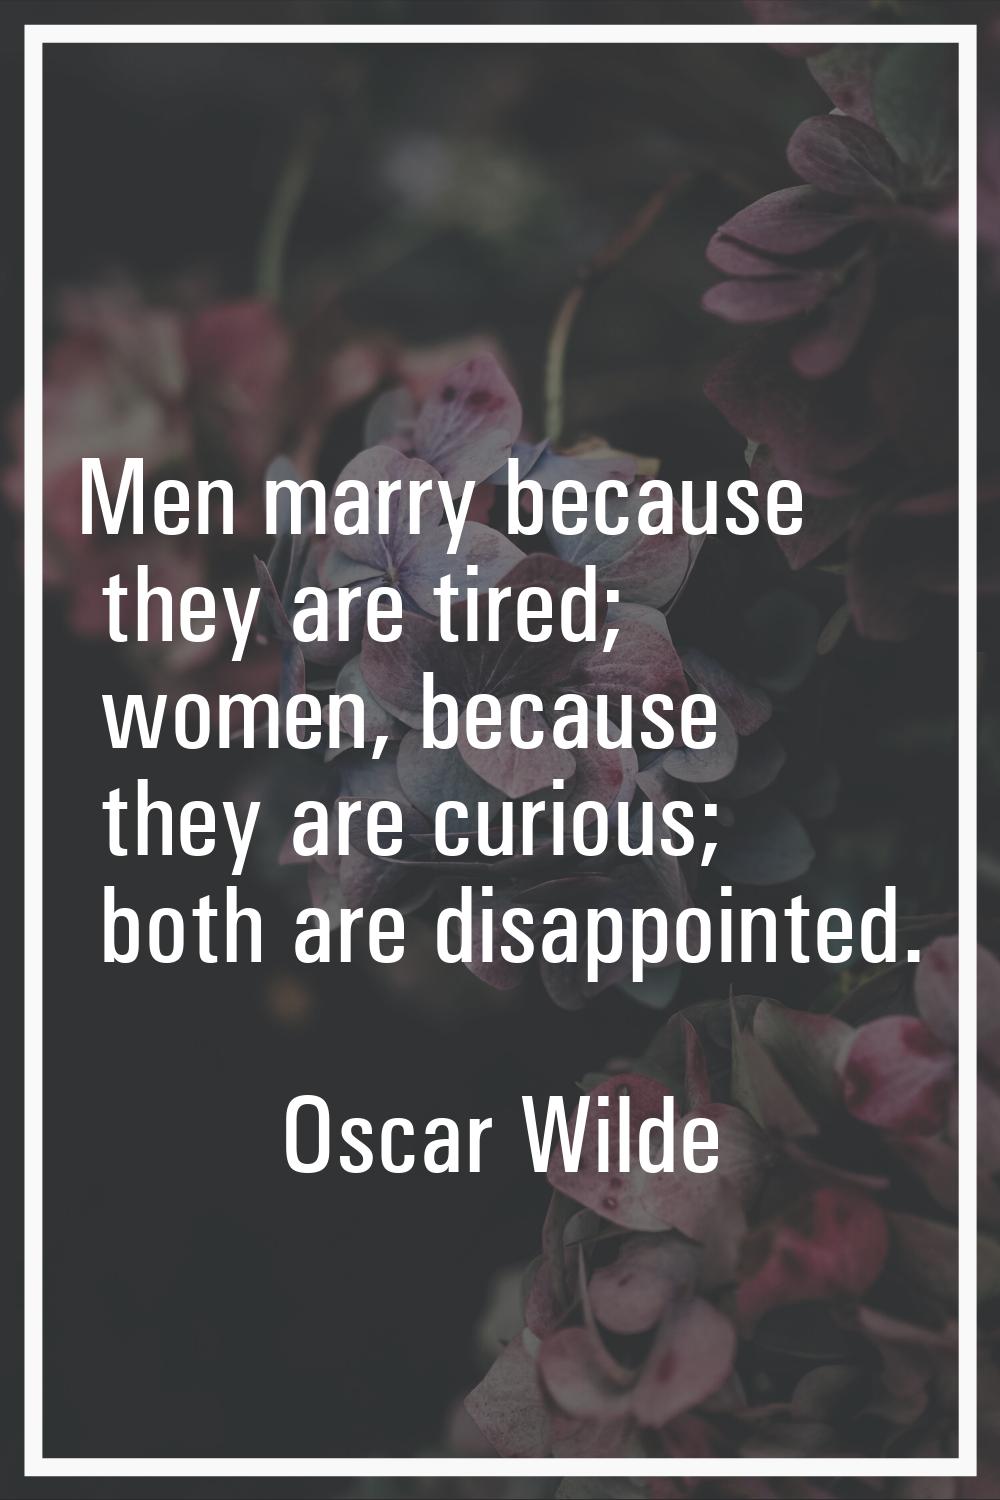 Men marry because they are tired; women, because they are curious; both are disappointed.